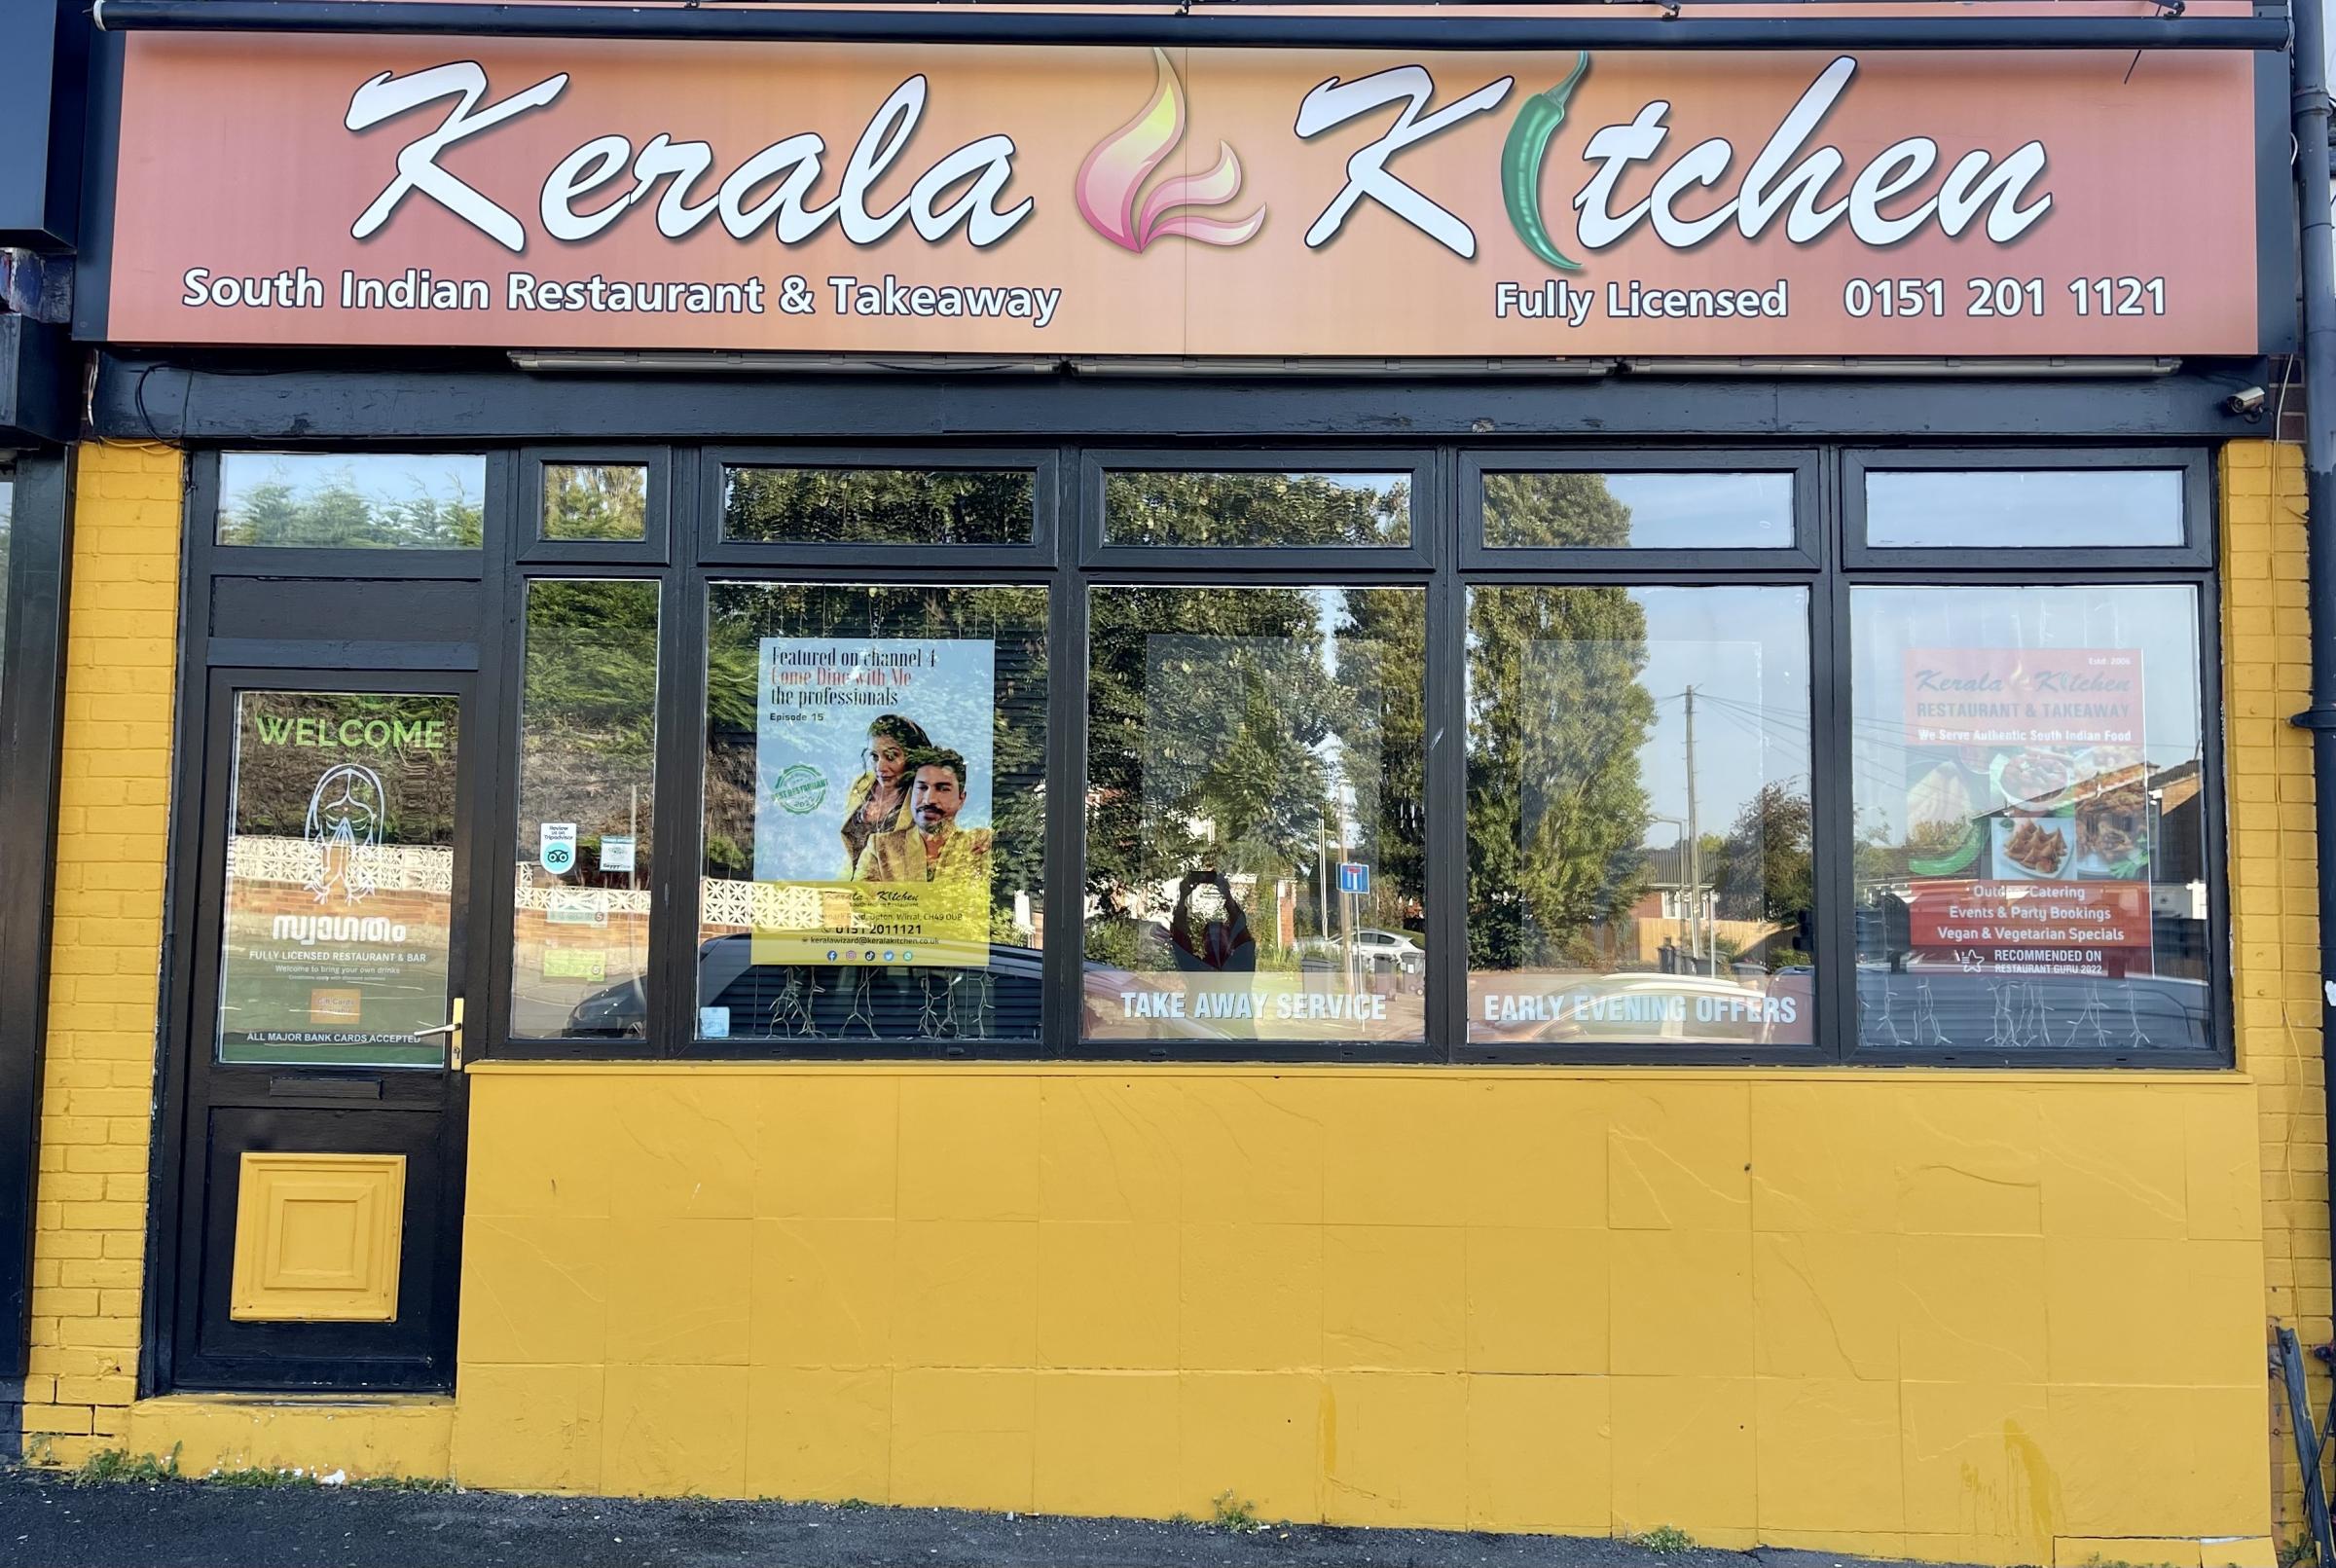 Kerala Kitchen moved to Arrowe Park Road in 2011